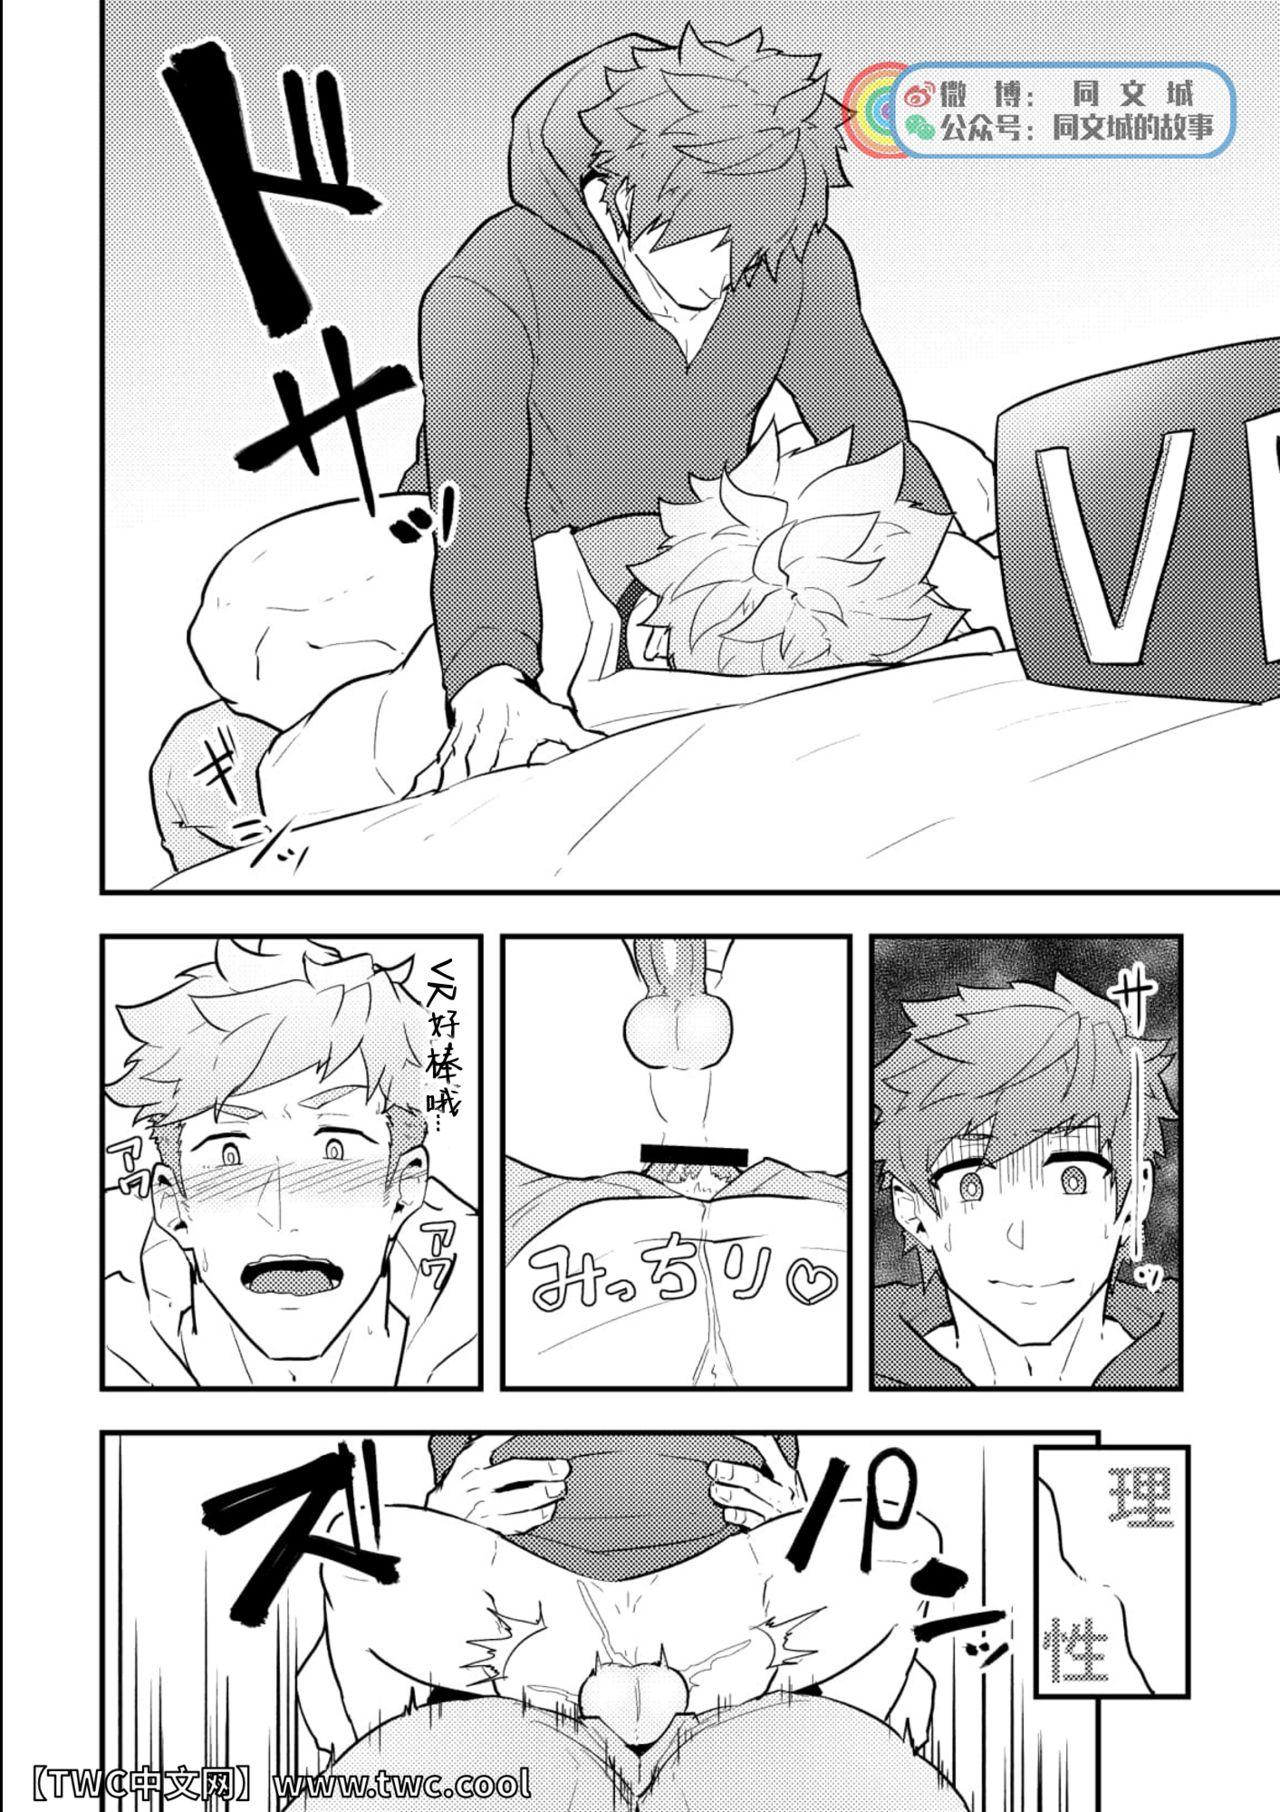 Butt Sex Onabe Hon C95 - Granblue fantasy Punch-out Pokemon | pocket monsters Gay Friend - Page 4